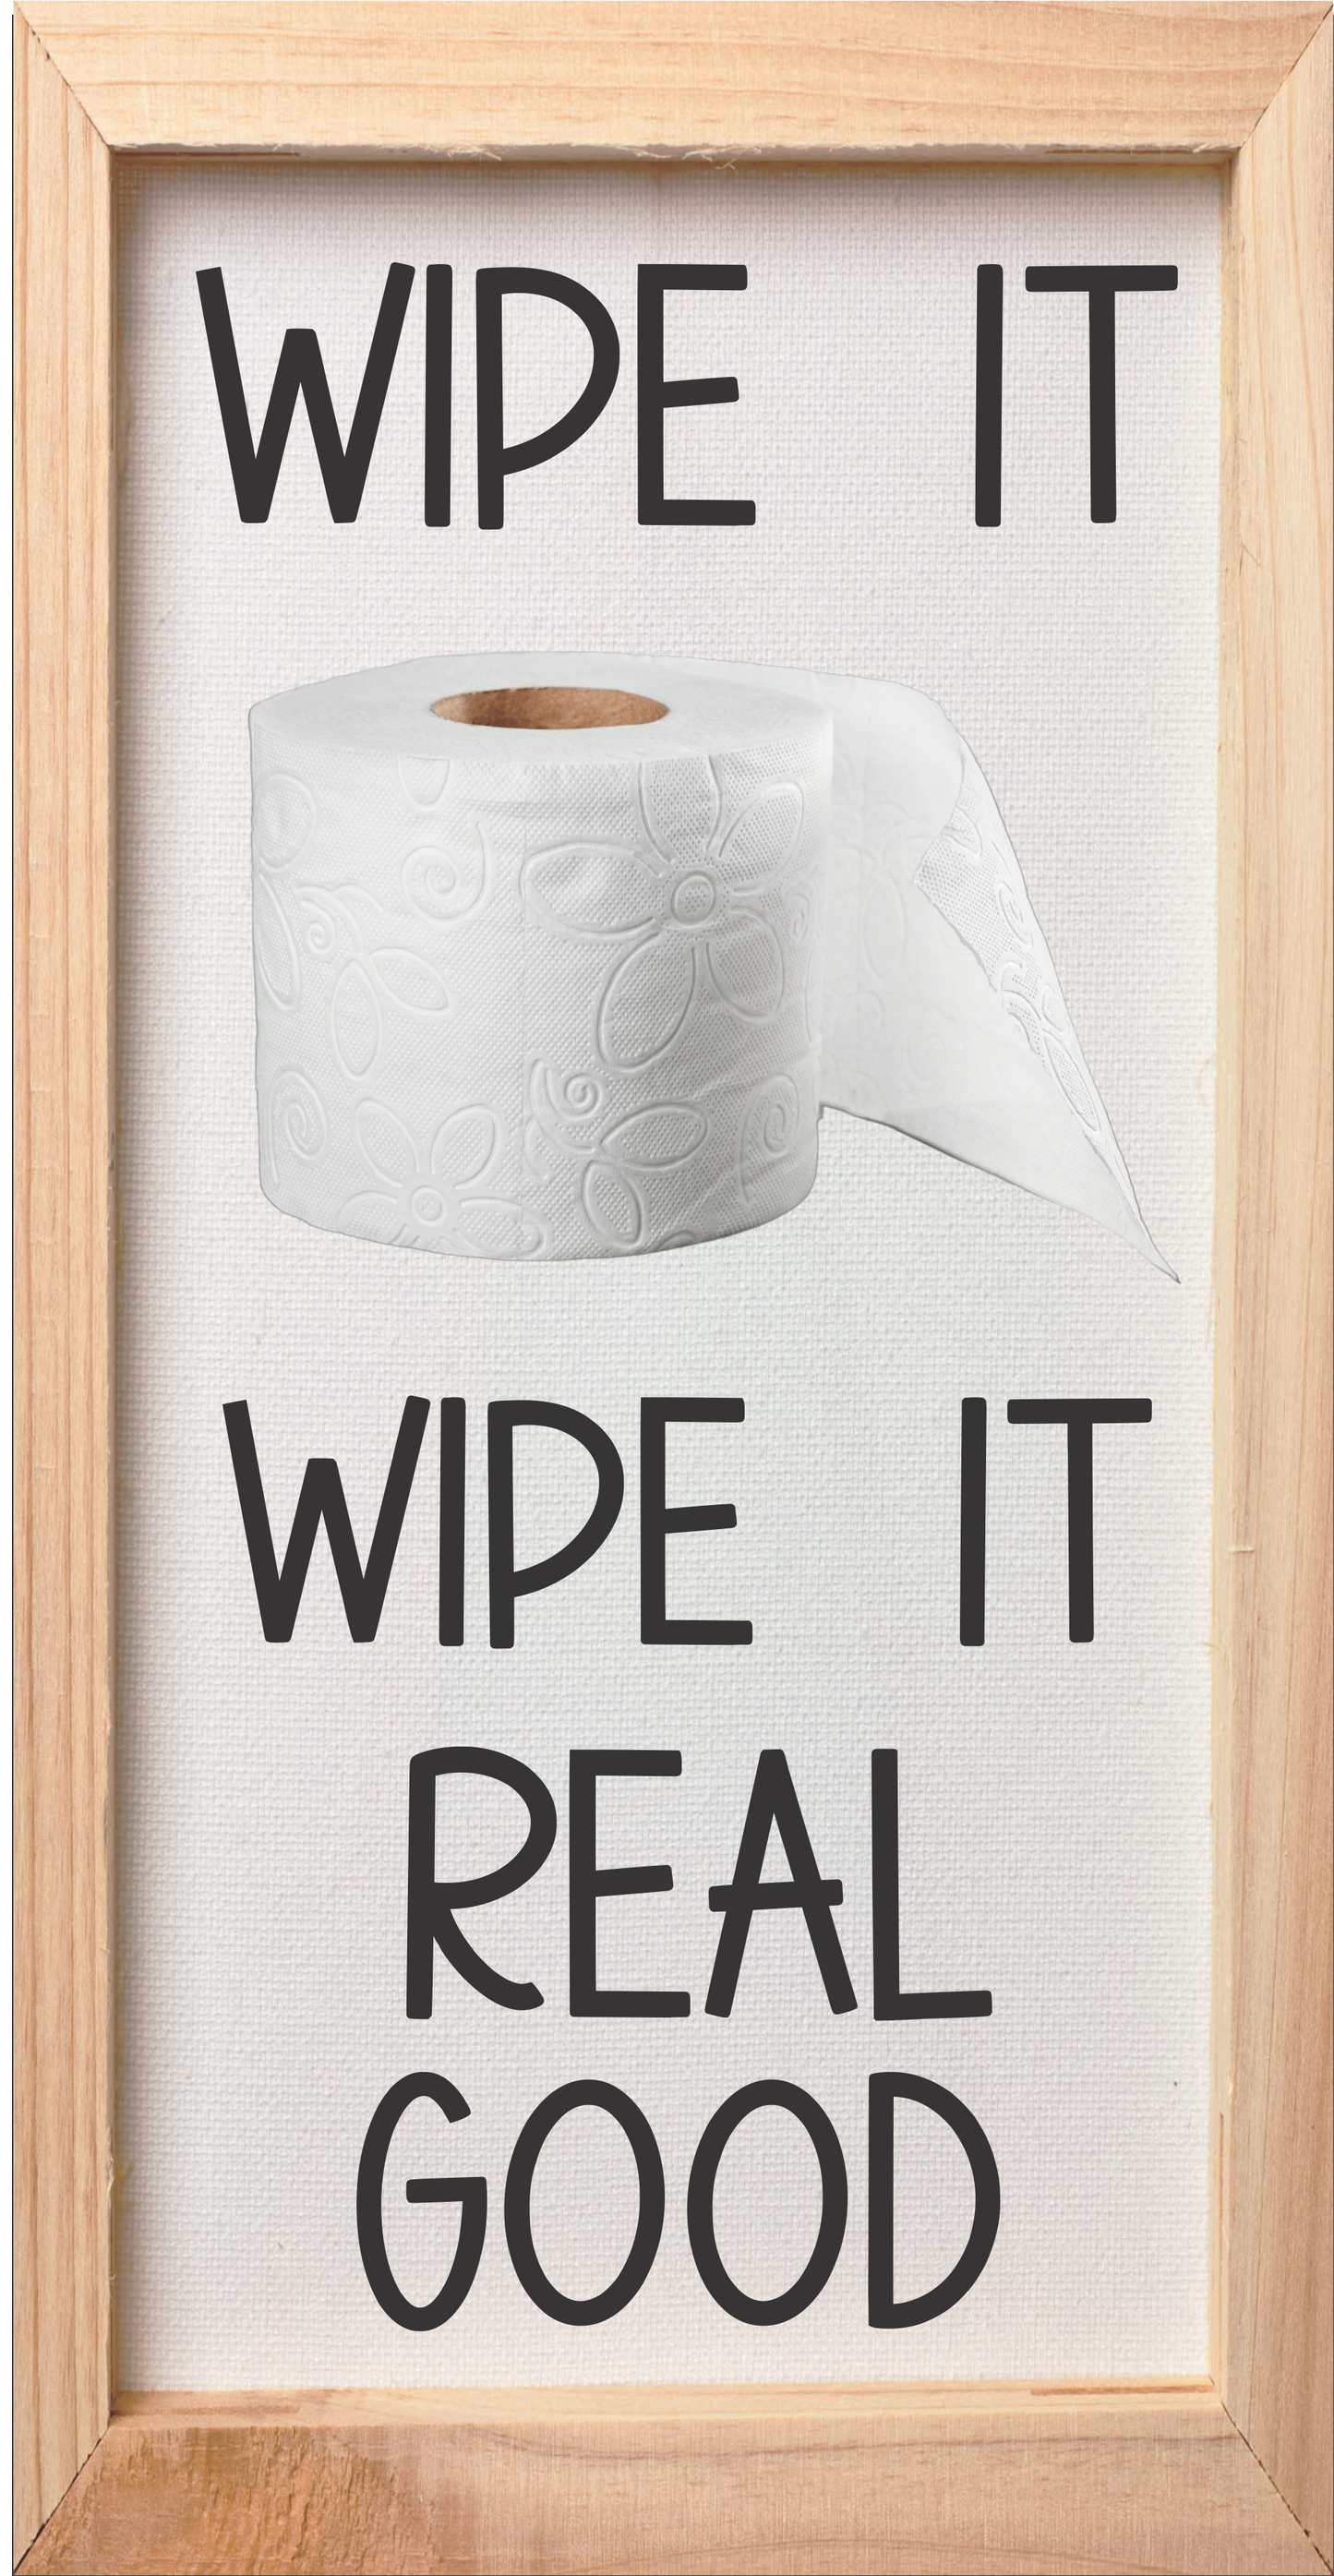 Wipe it real good light frame sign 6x12